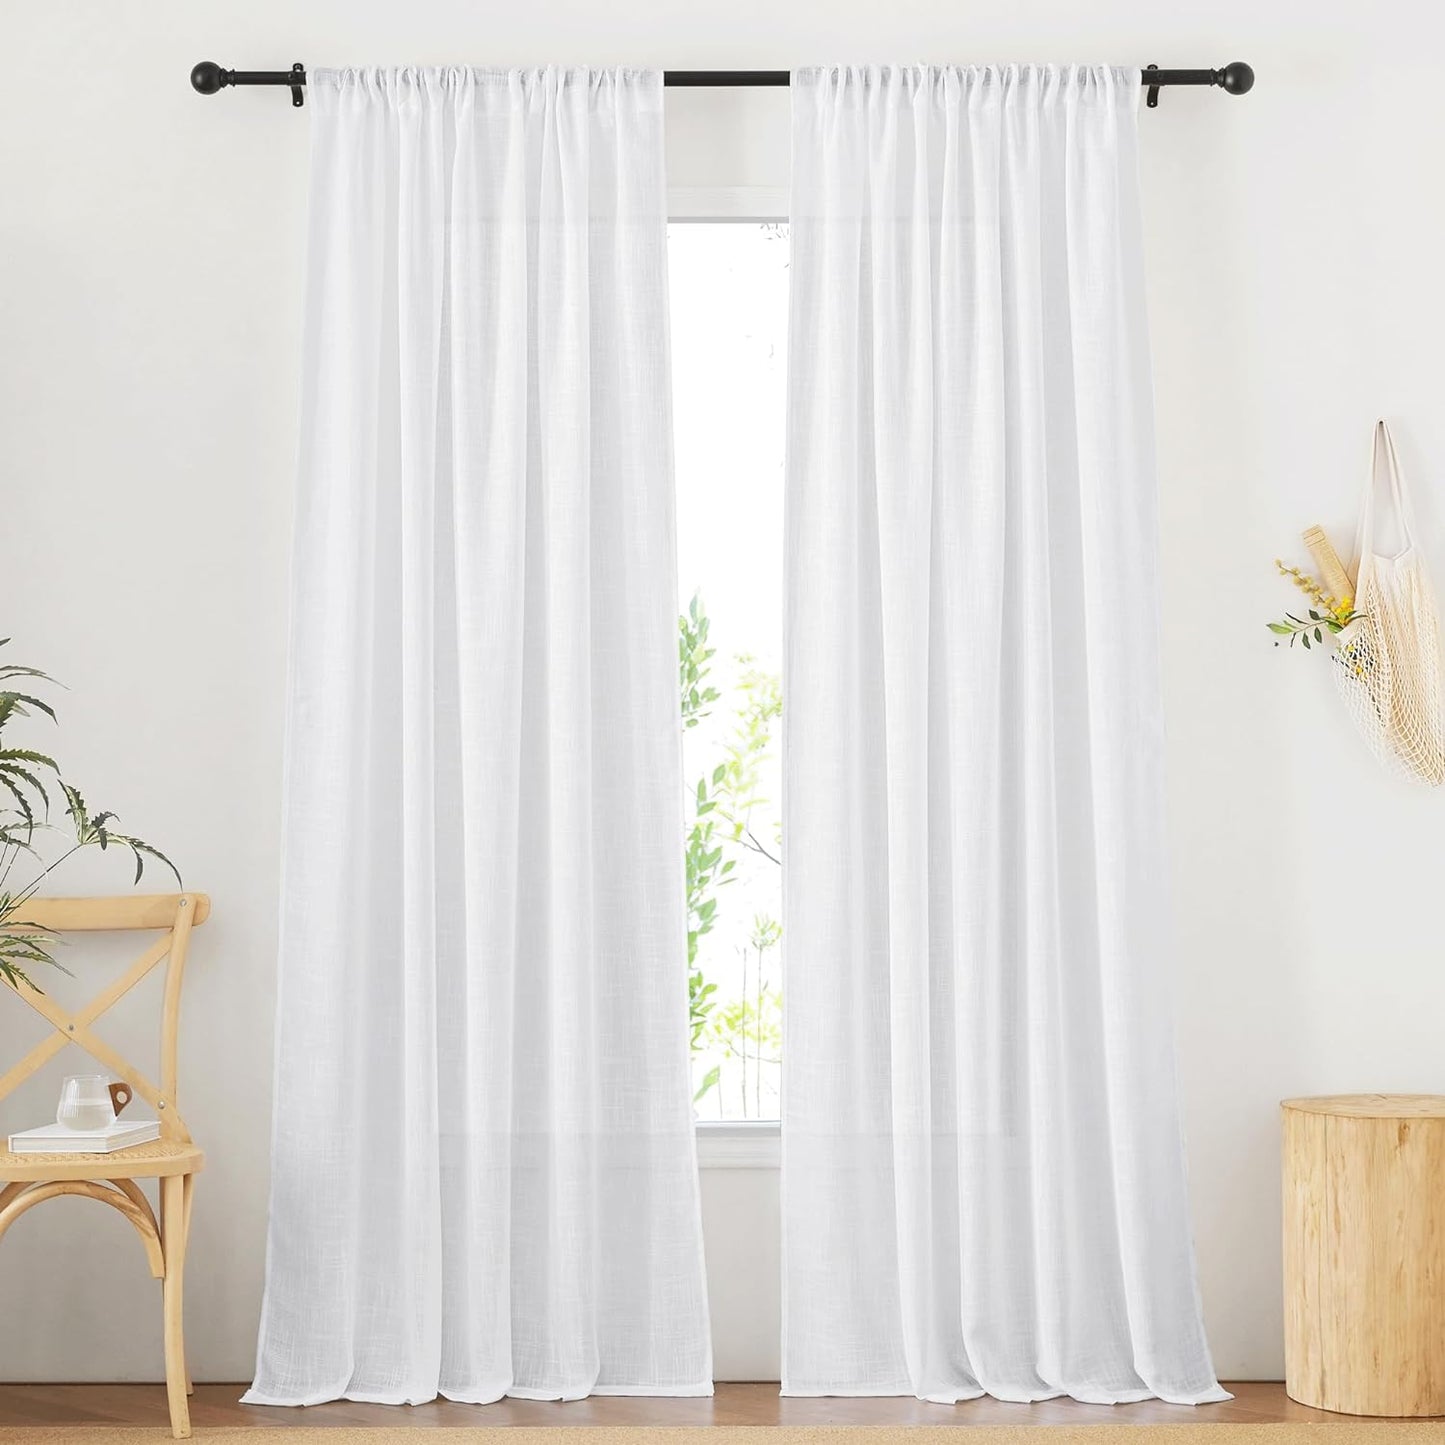 NICETOWN Linen Textured Curtain for Bedroom/Living Room Thermal Insulated Back Tab Linen Look Curtain Drapes Soft Rich Material Light Reducing Drape Panels for Window, 2 Panels, 52 X 84 Inch, Linen  NICETOWN White W52 X L108 